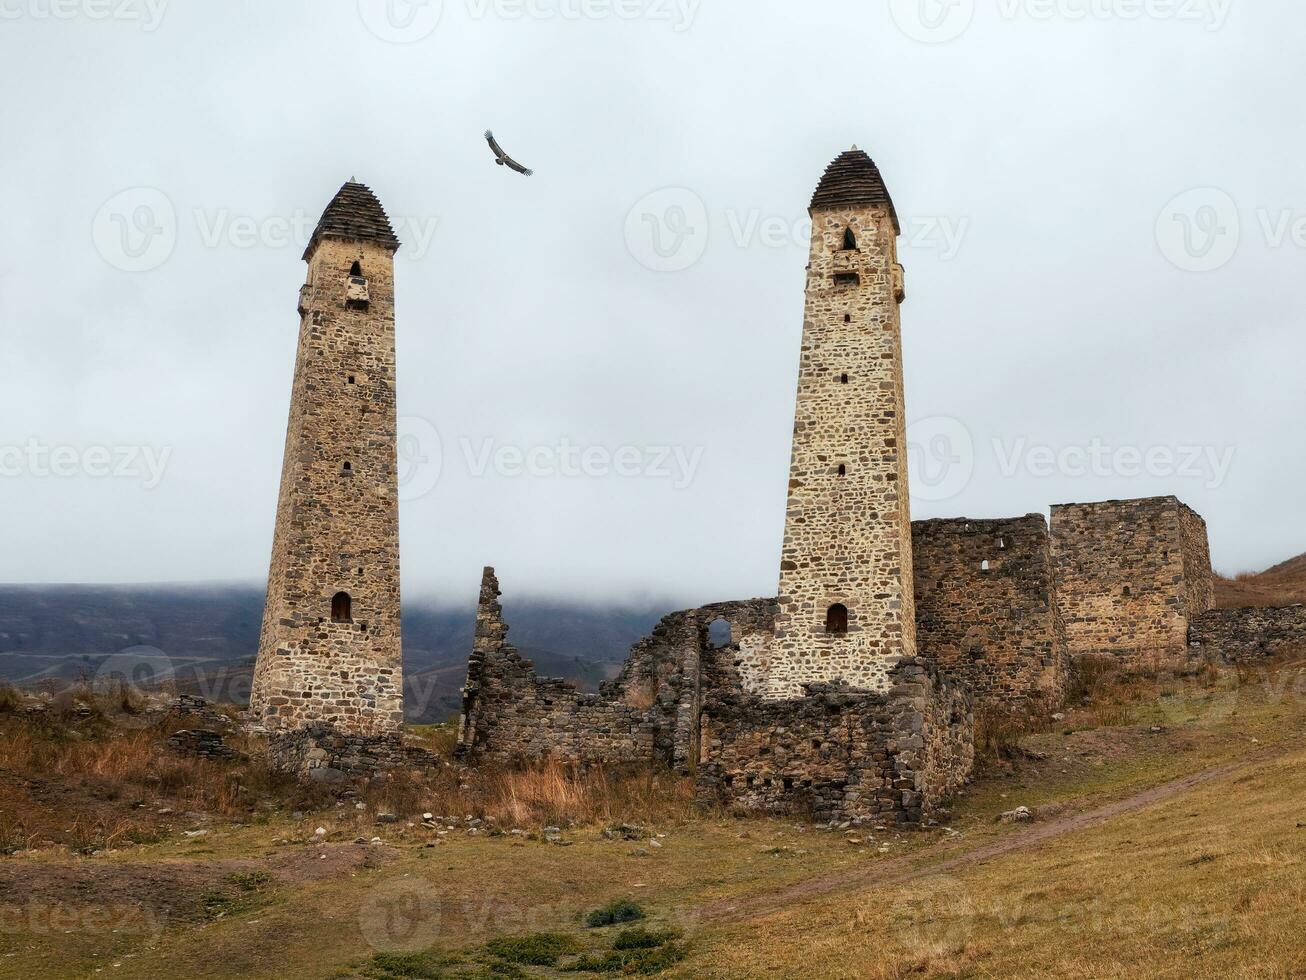 Battle towers Erzi in the Jeyrah gorge. Medieval tower complex Erzi, one of the largest medieval castle-type tower villages, located on the extremity of the mountain range in Ingushetia, Russia. photo